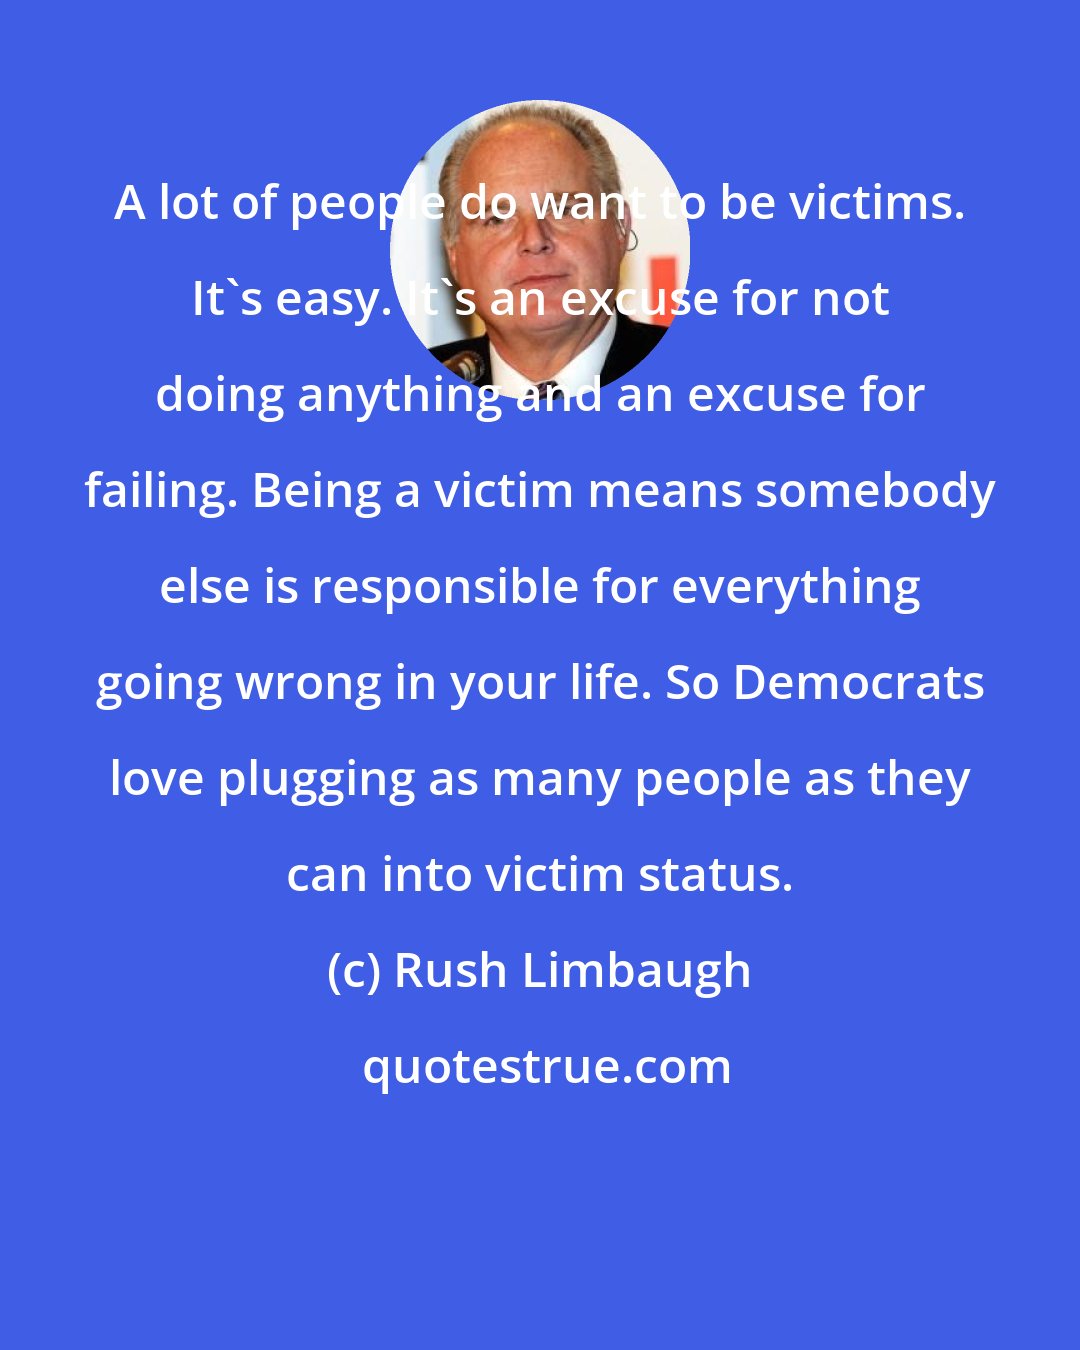 Rush Limbaugh: A lot of people do want to be victims. It's easy. It's an excuse for not doing anything and an excuse for failing. Being a victim means somebody else is responsible for everything going wrong in your life. So Democrats love plugging as many people as they can into victim status.